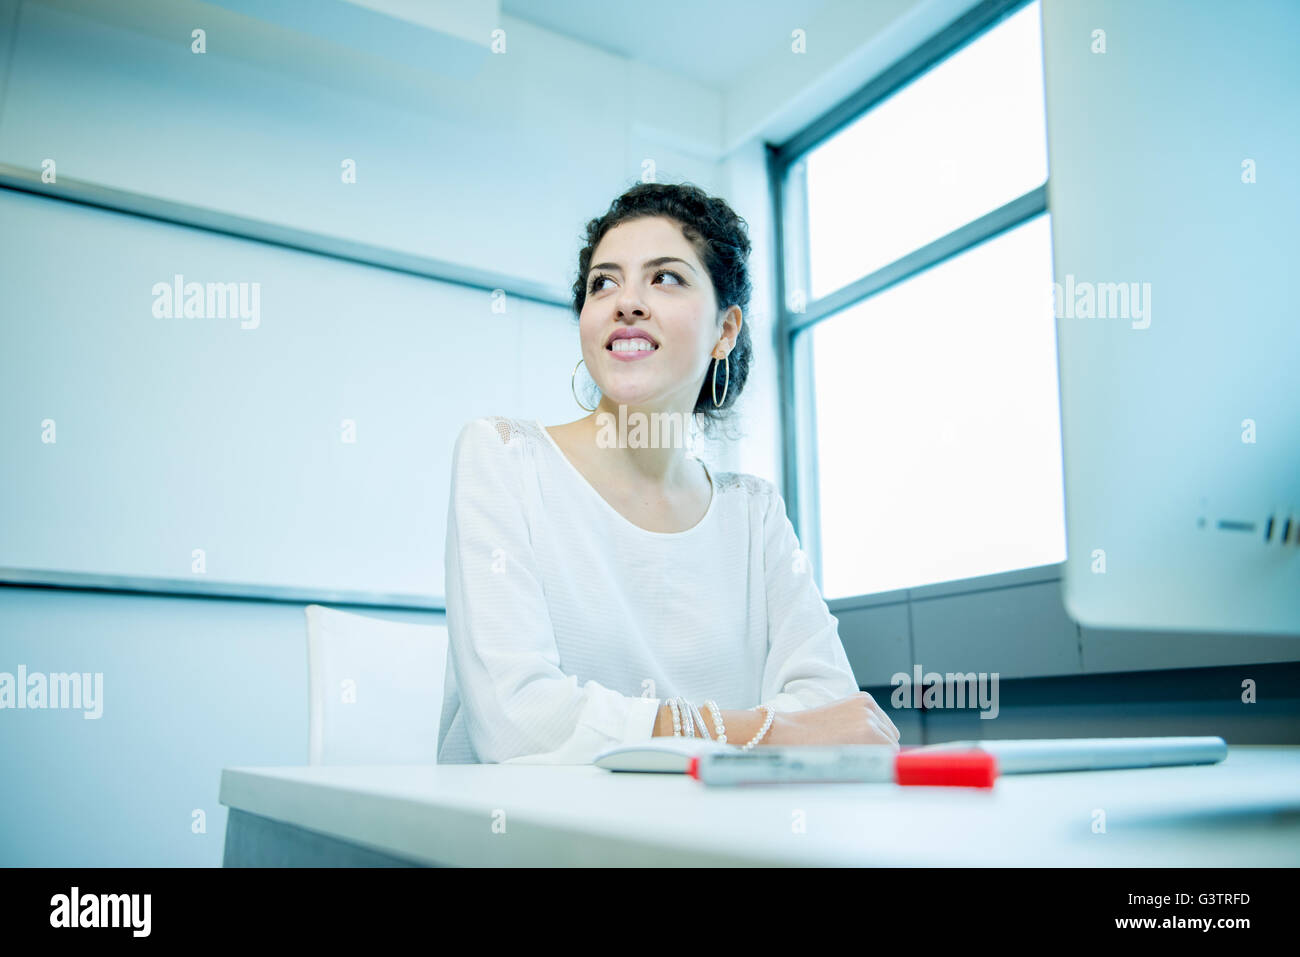 A professional woman sitting in front of a computer in an office environment. Stock Photo